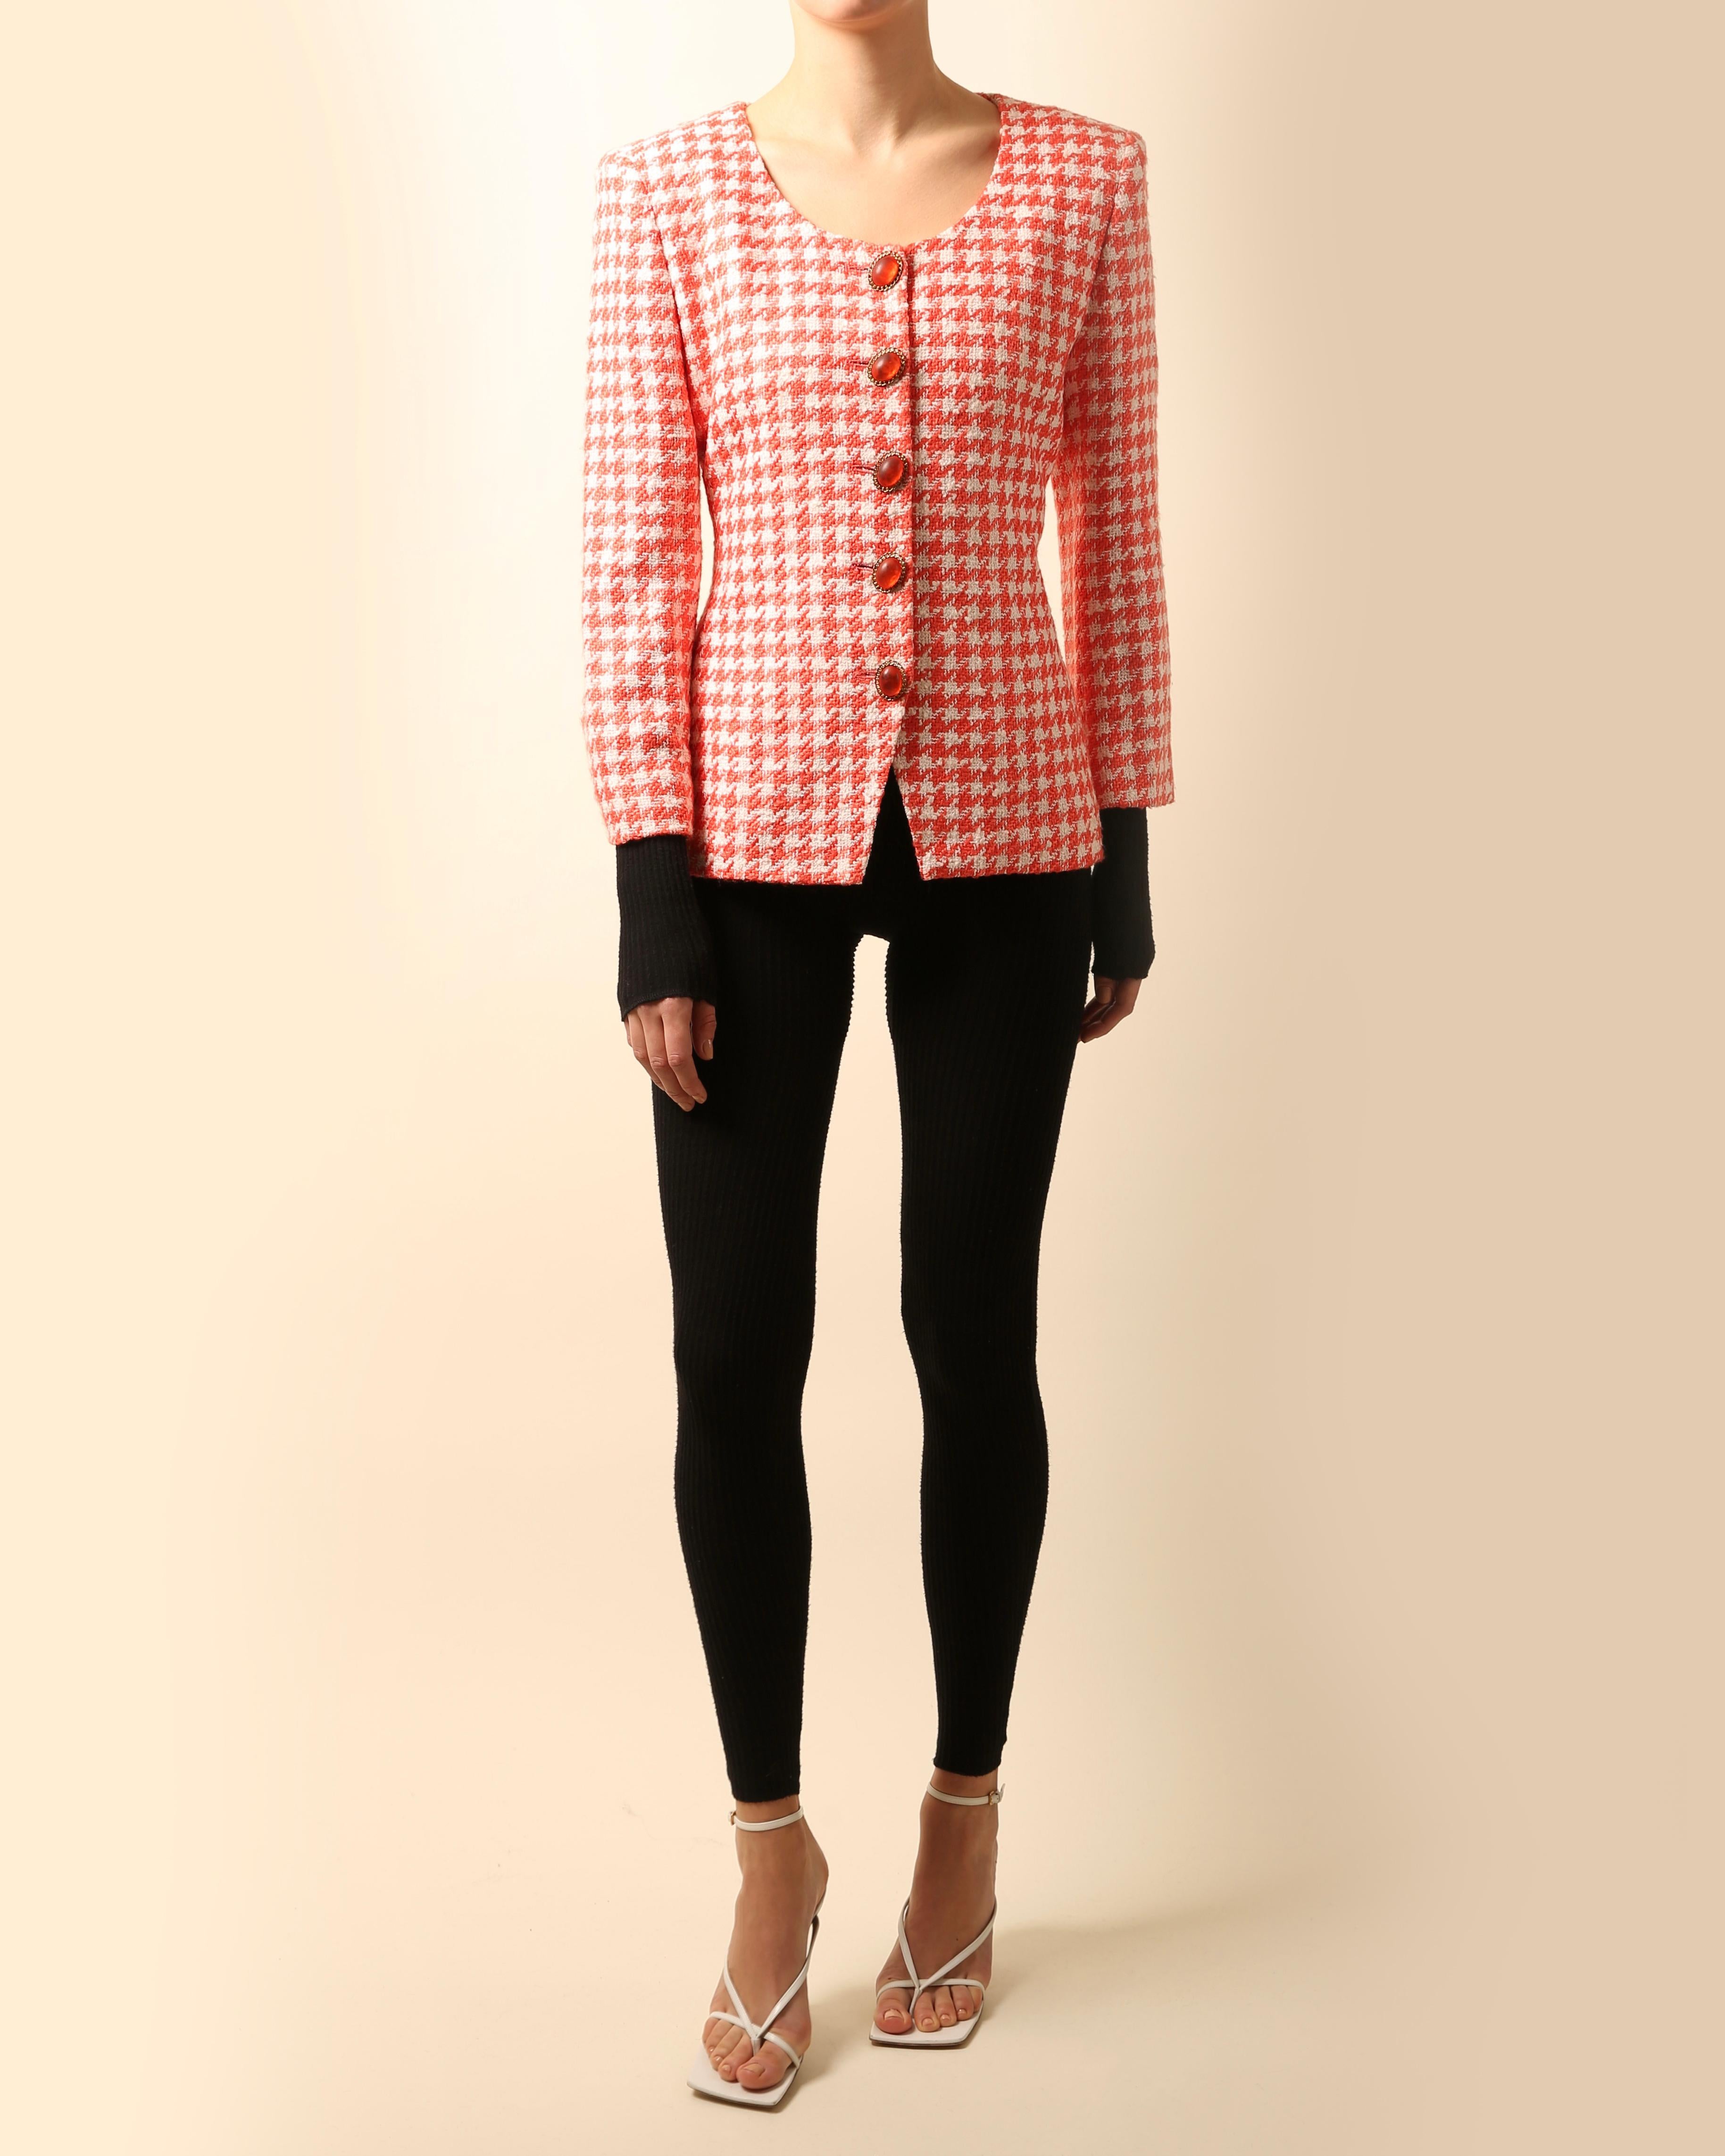 Christian Dior Vintage blazer style jacket in red and white checkered tweed
Oversized jewel buttons
Padded shoulders to create a beautifully structured fit

Composition: 
Unknown - composition labels have been removed

Size:
Marked a US 8 but will